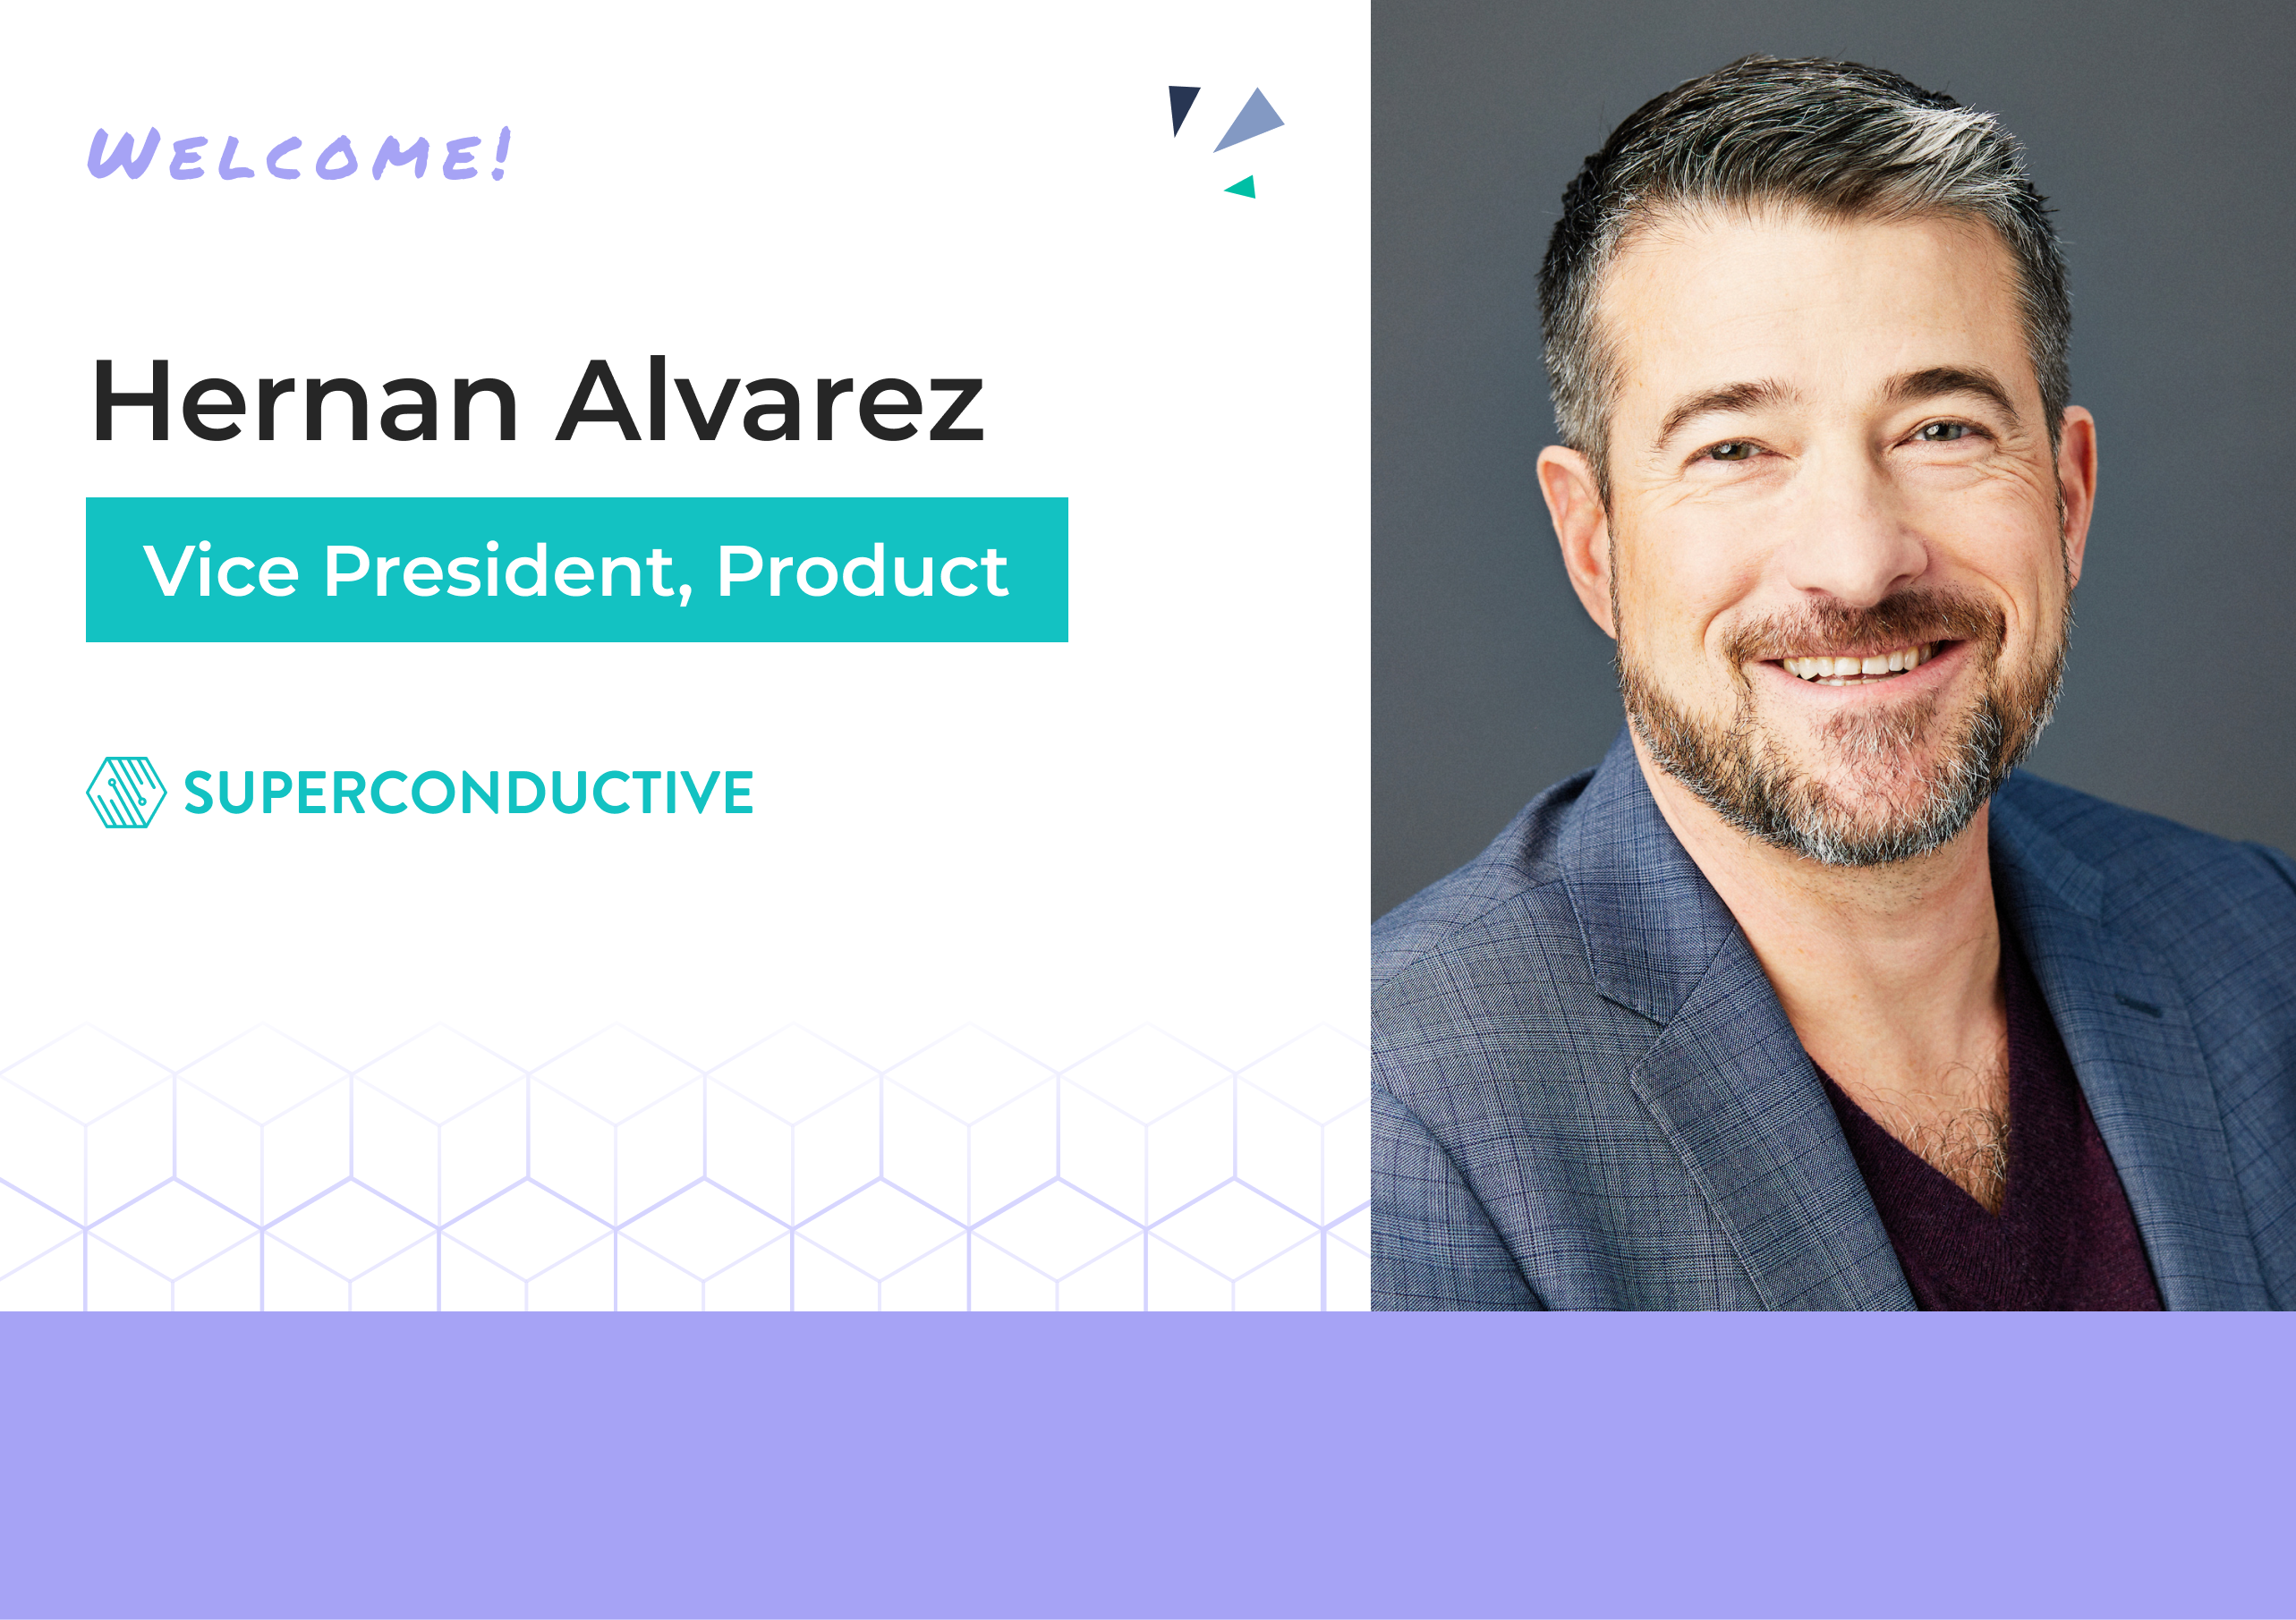 Cover card with welcome text for Hernan Alvarez and headshot